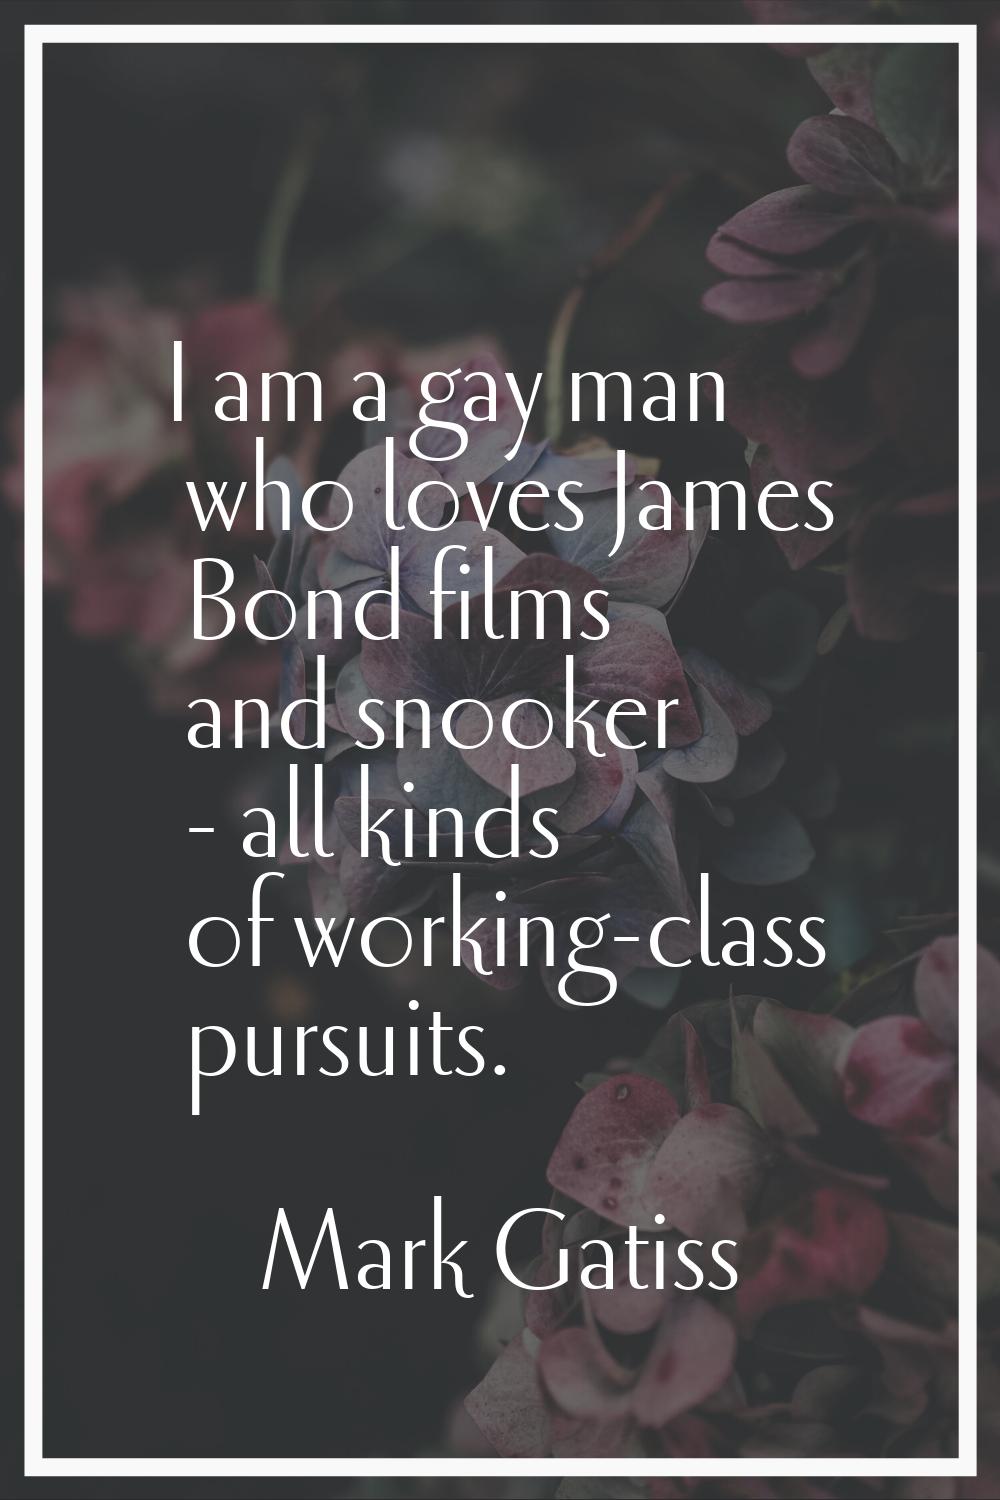 I am a gay man who loves James Bond films and snooker - all kinds of working-class pursuits.